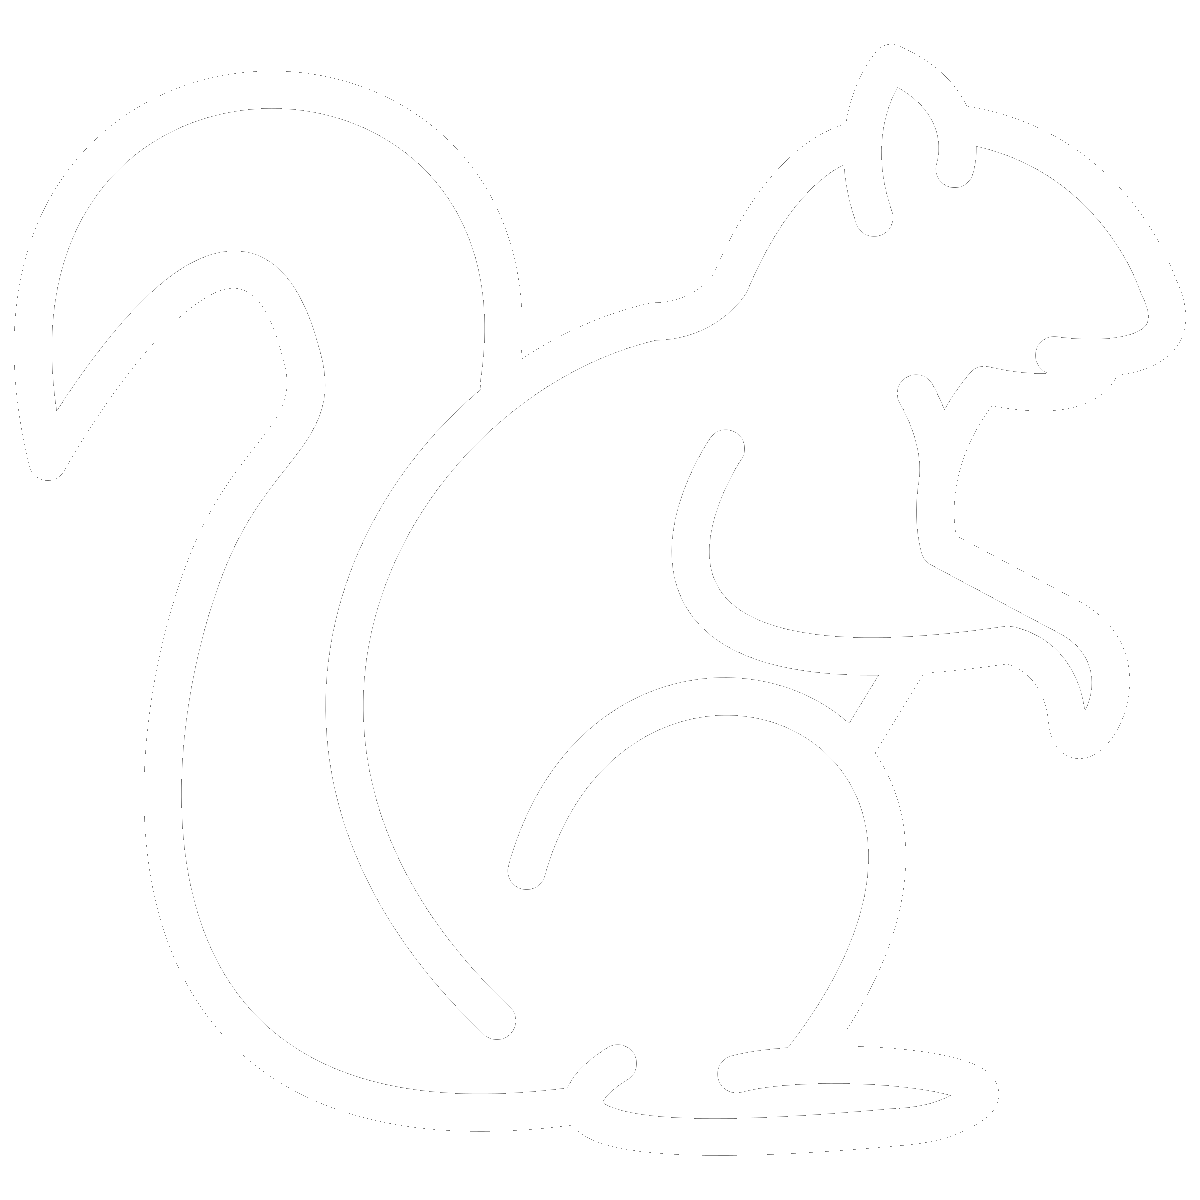 Outline of a squirrel